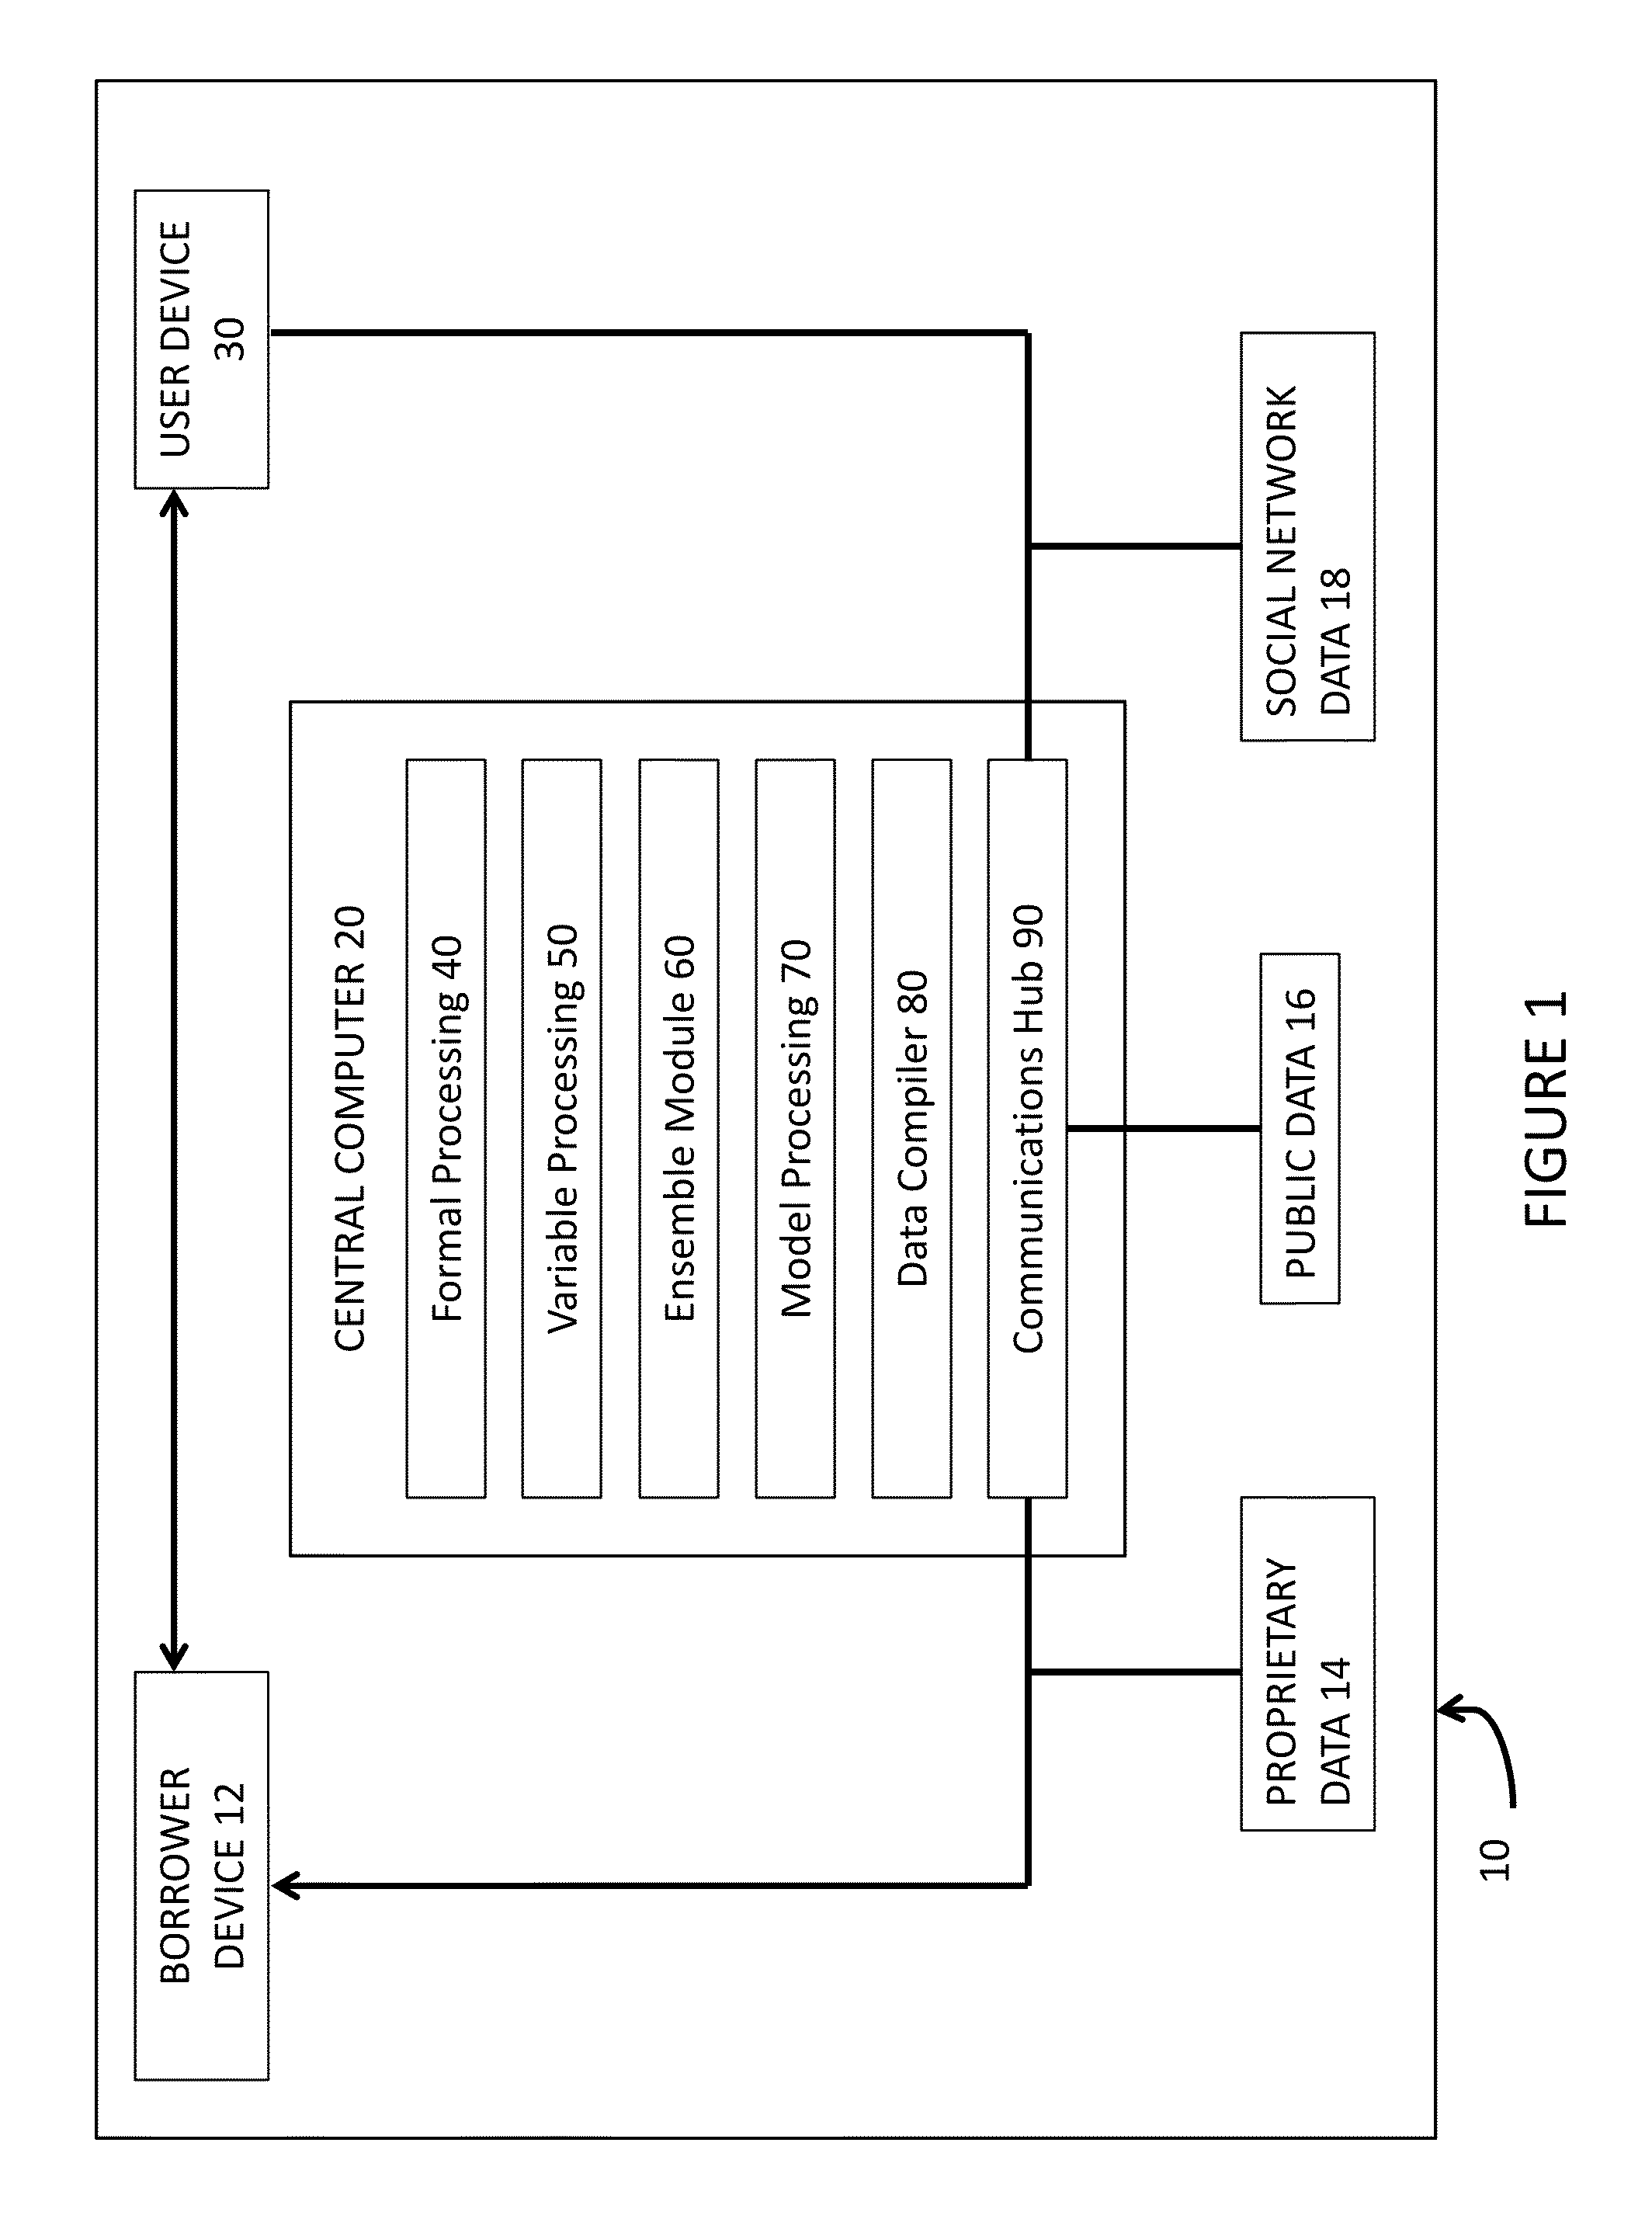 System and method for building and validating a credit scoring function